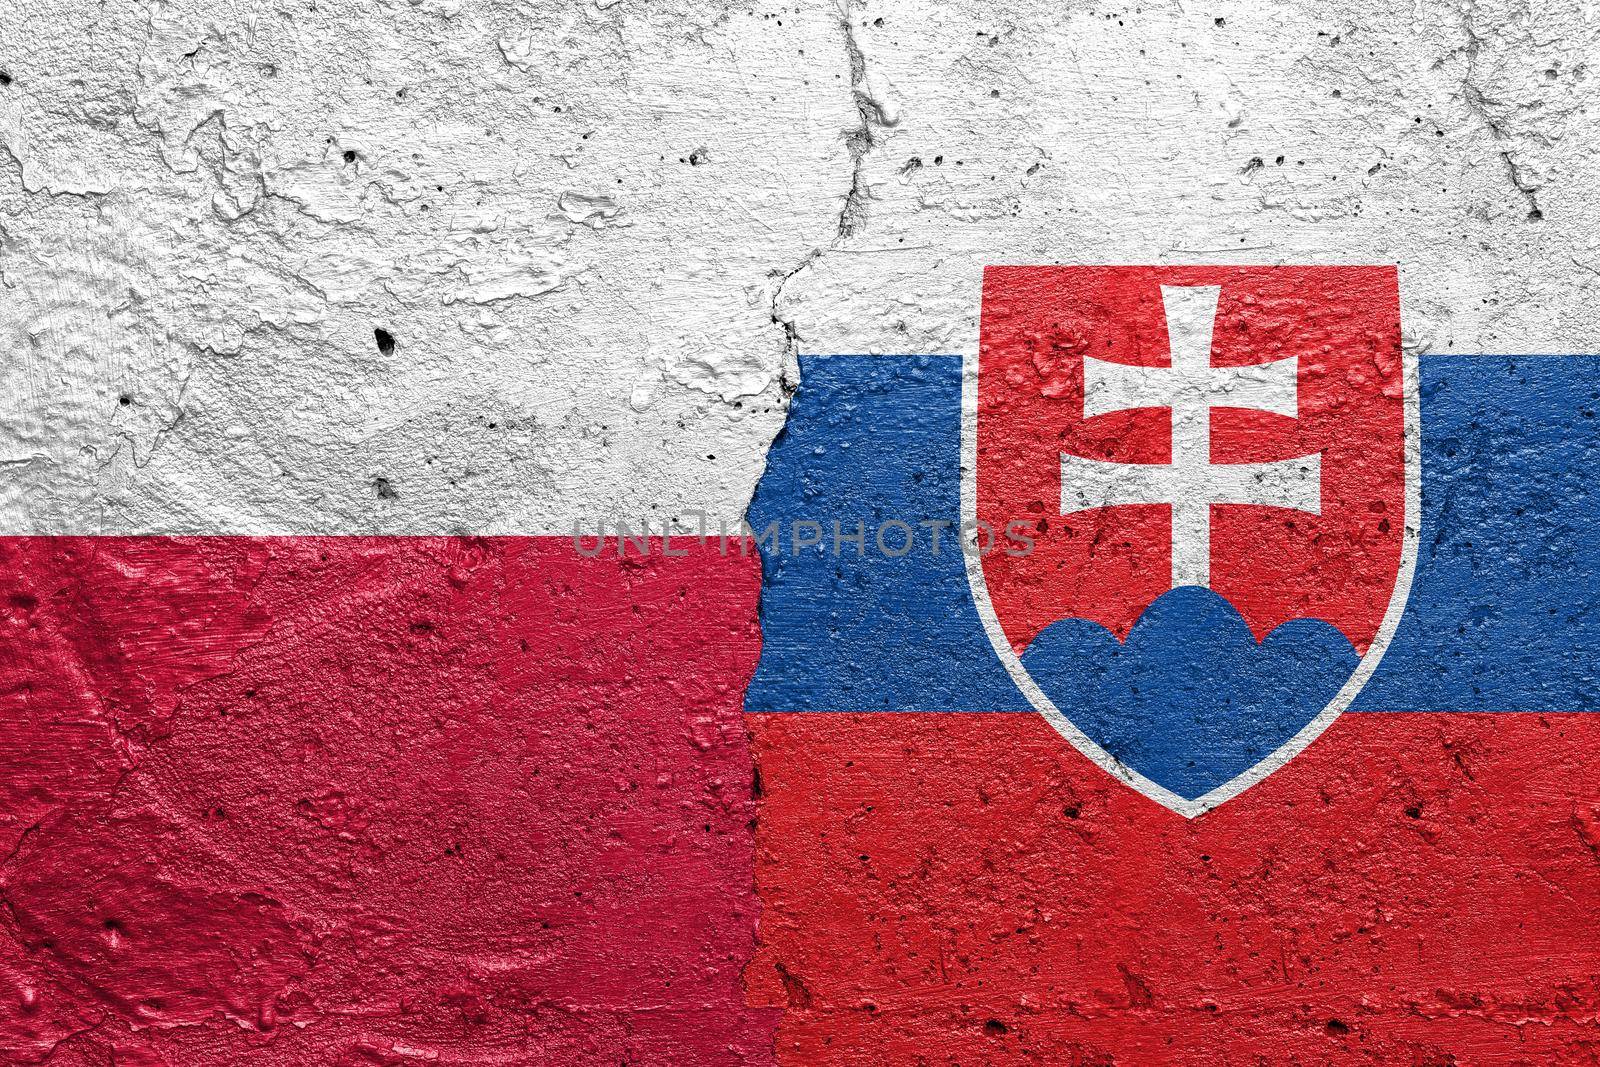 Poland and Slovakia - Cracked concrete wall painted with a Polish flag on the left and a Slovakian flag on the right